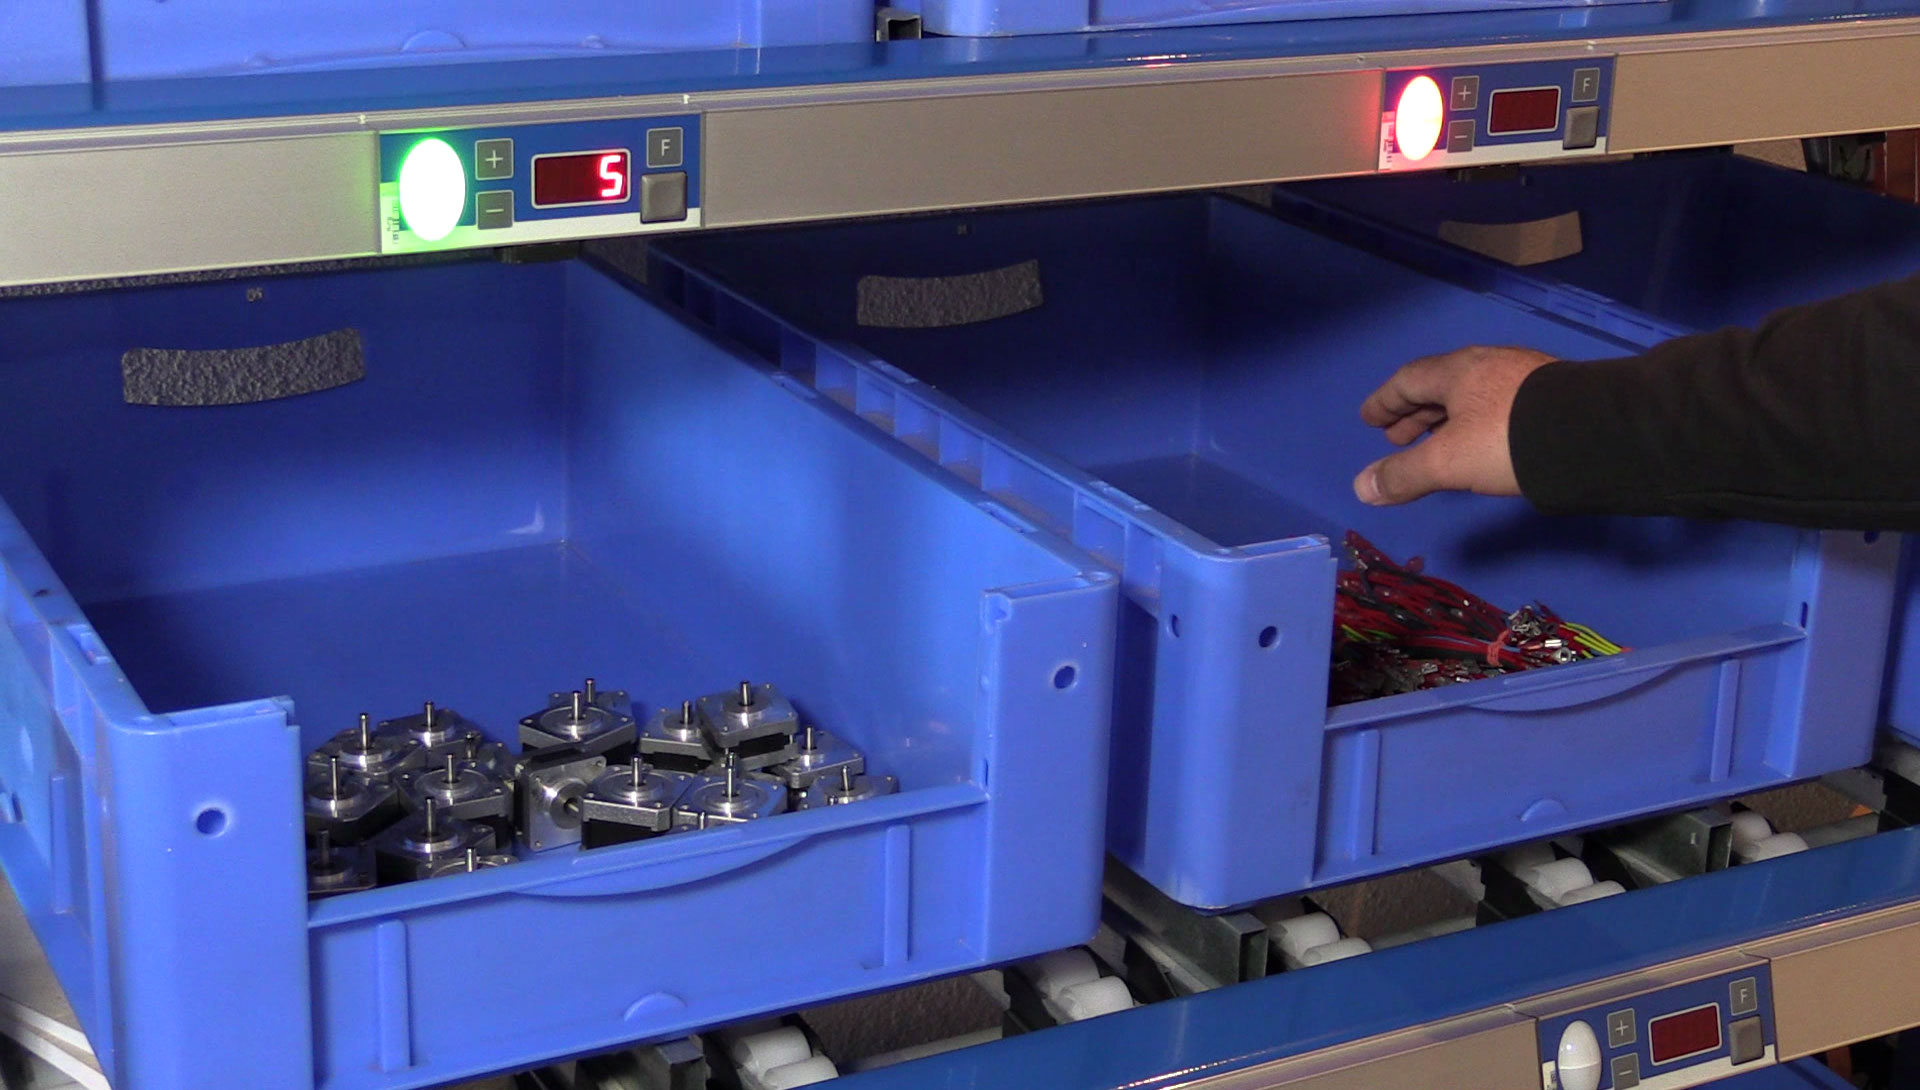 Pick-by-Light with intervention sensor detects faulty intervention in an incorrect picking container